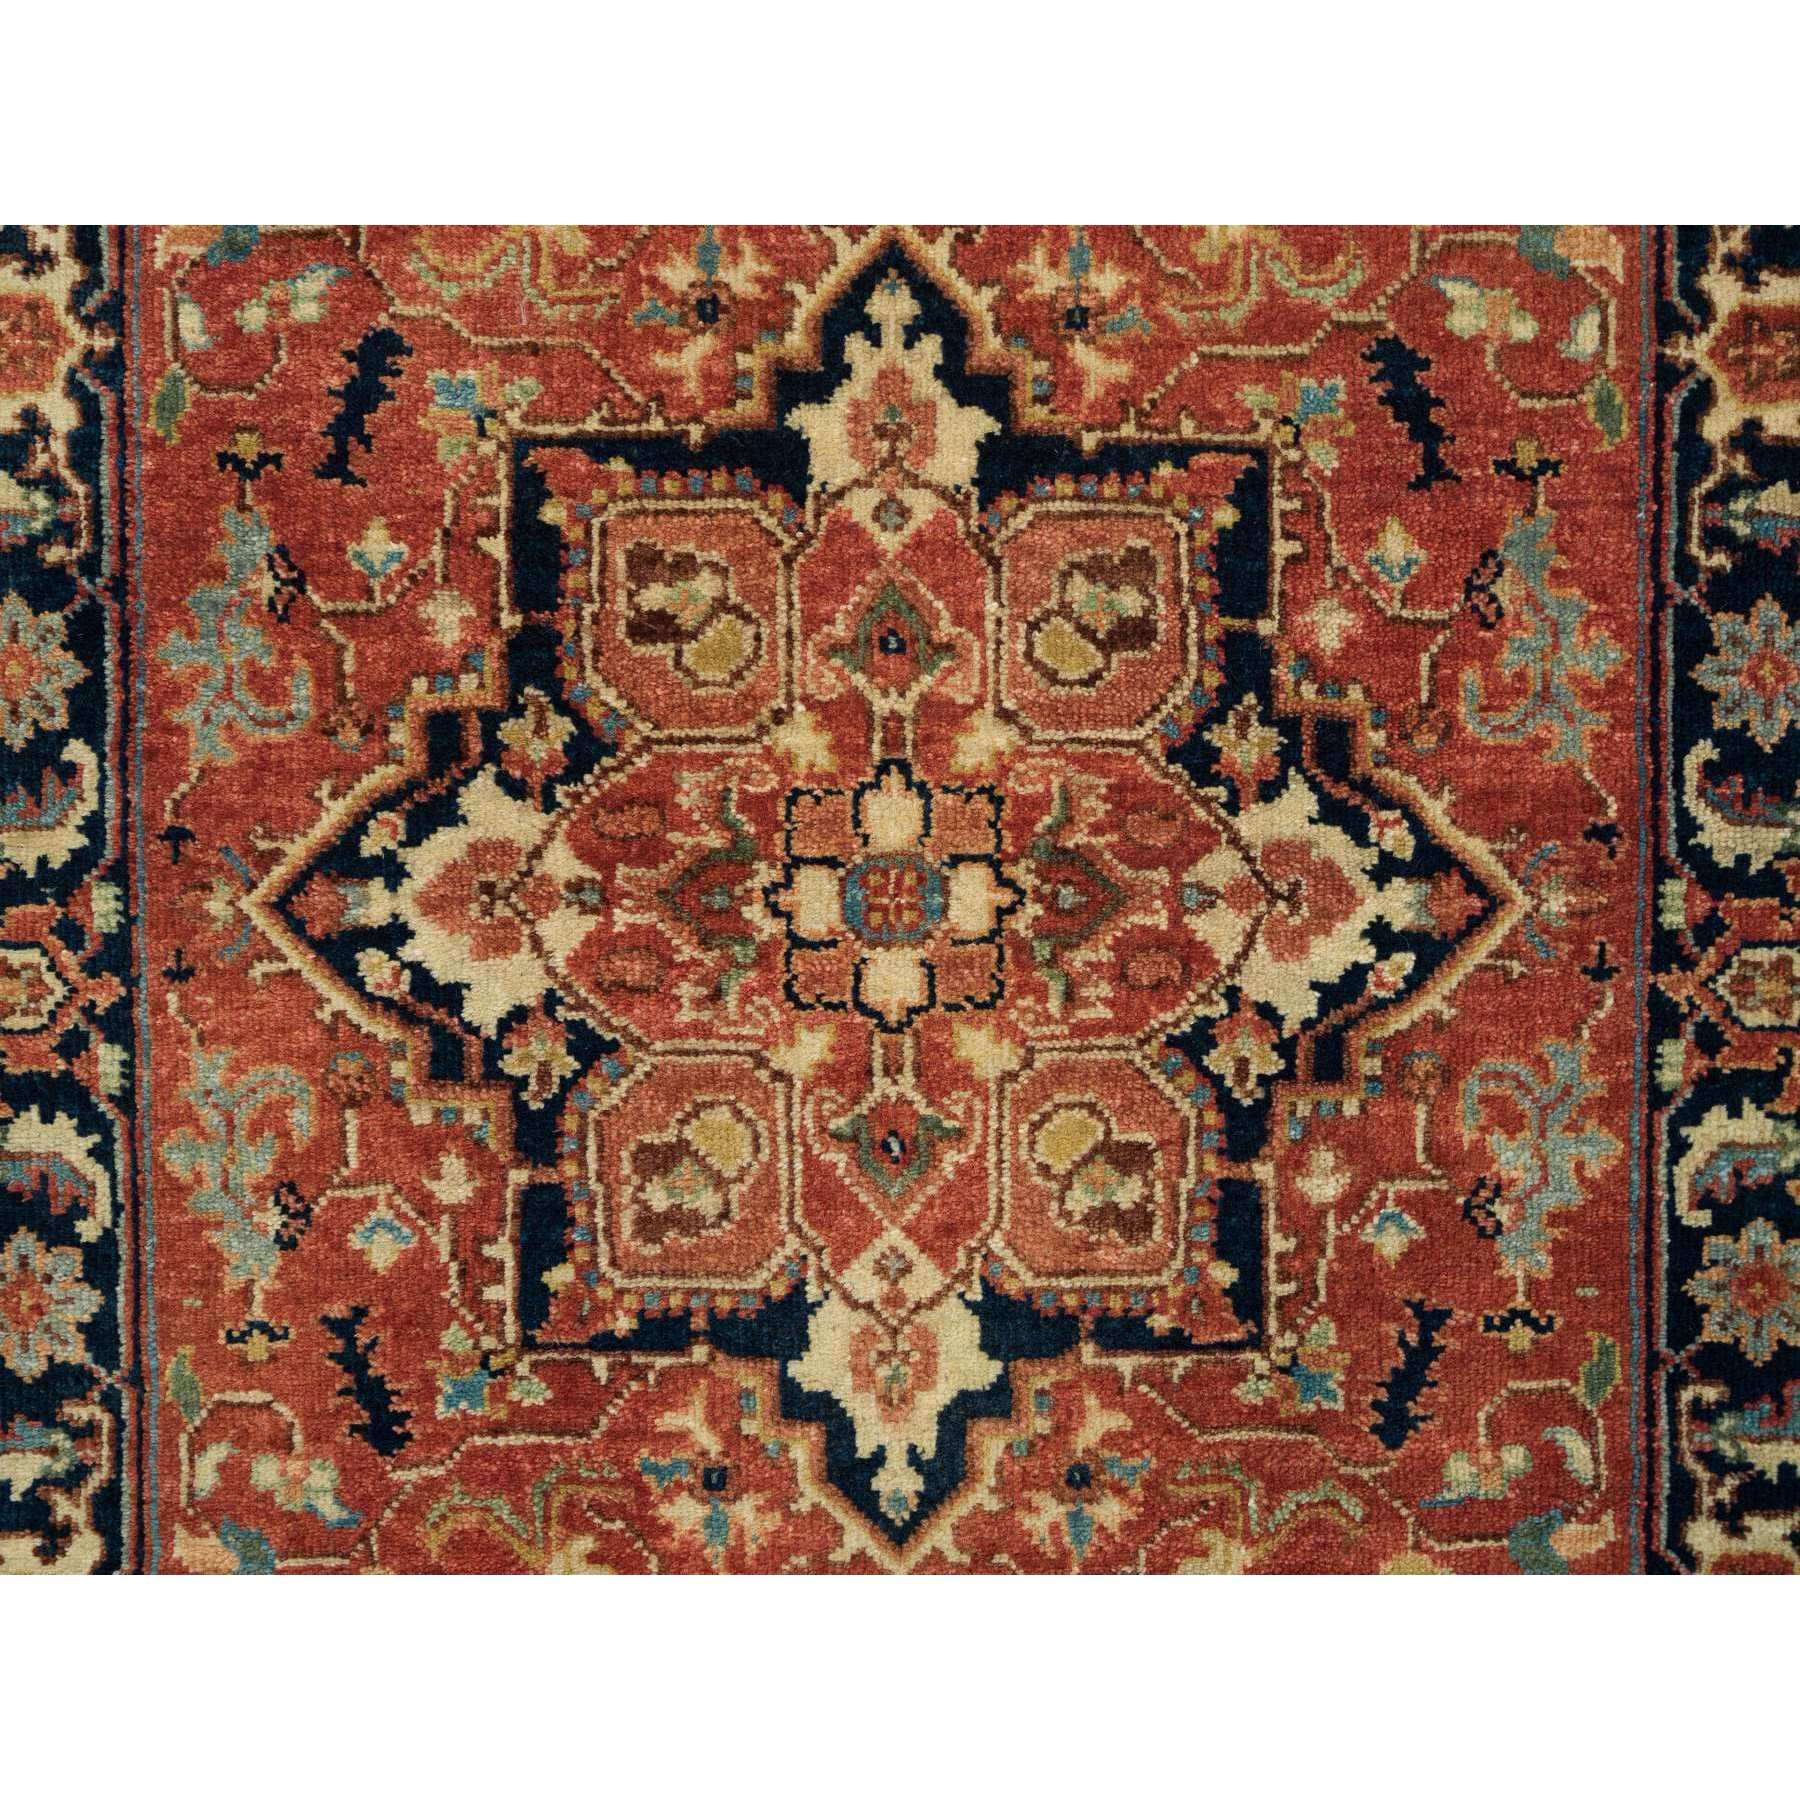 2'7"x16'2" Terracotta Red, Hand Woven, Antiqued Fine Heriz Re-Creation, Natural Wool, Natural Dyes, Dense Weave, XL Runner Oriental Rug 